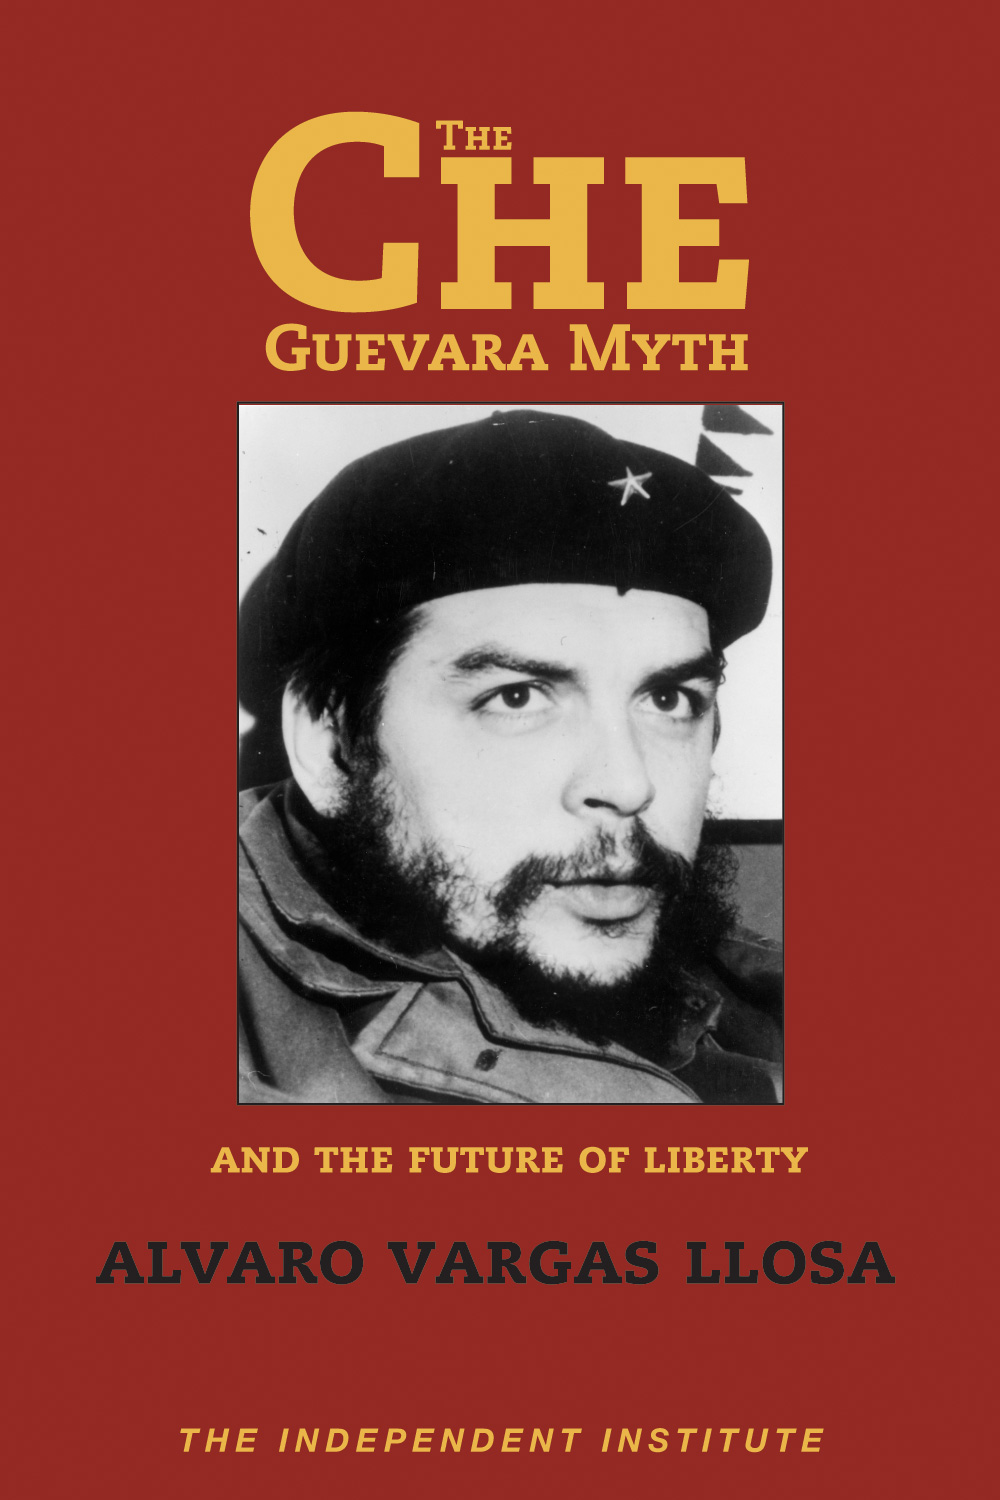 The Che Guevara Myth: And the Future of Liberty